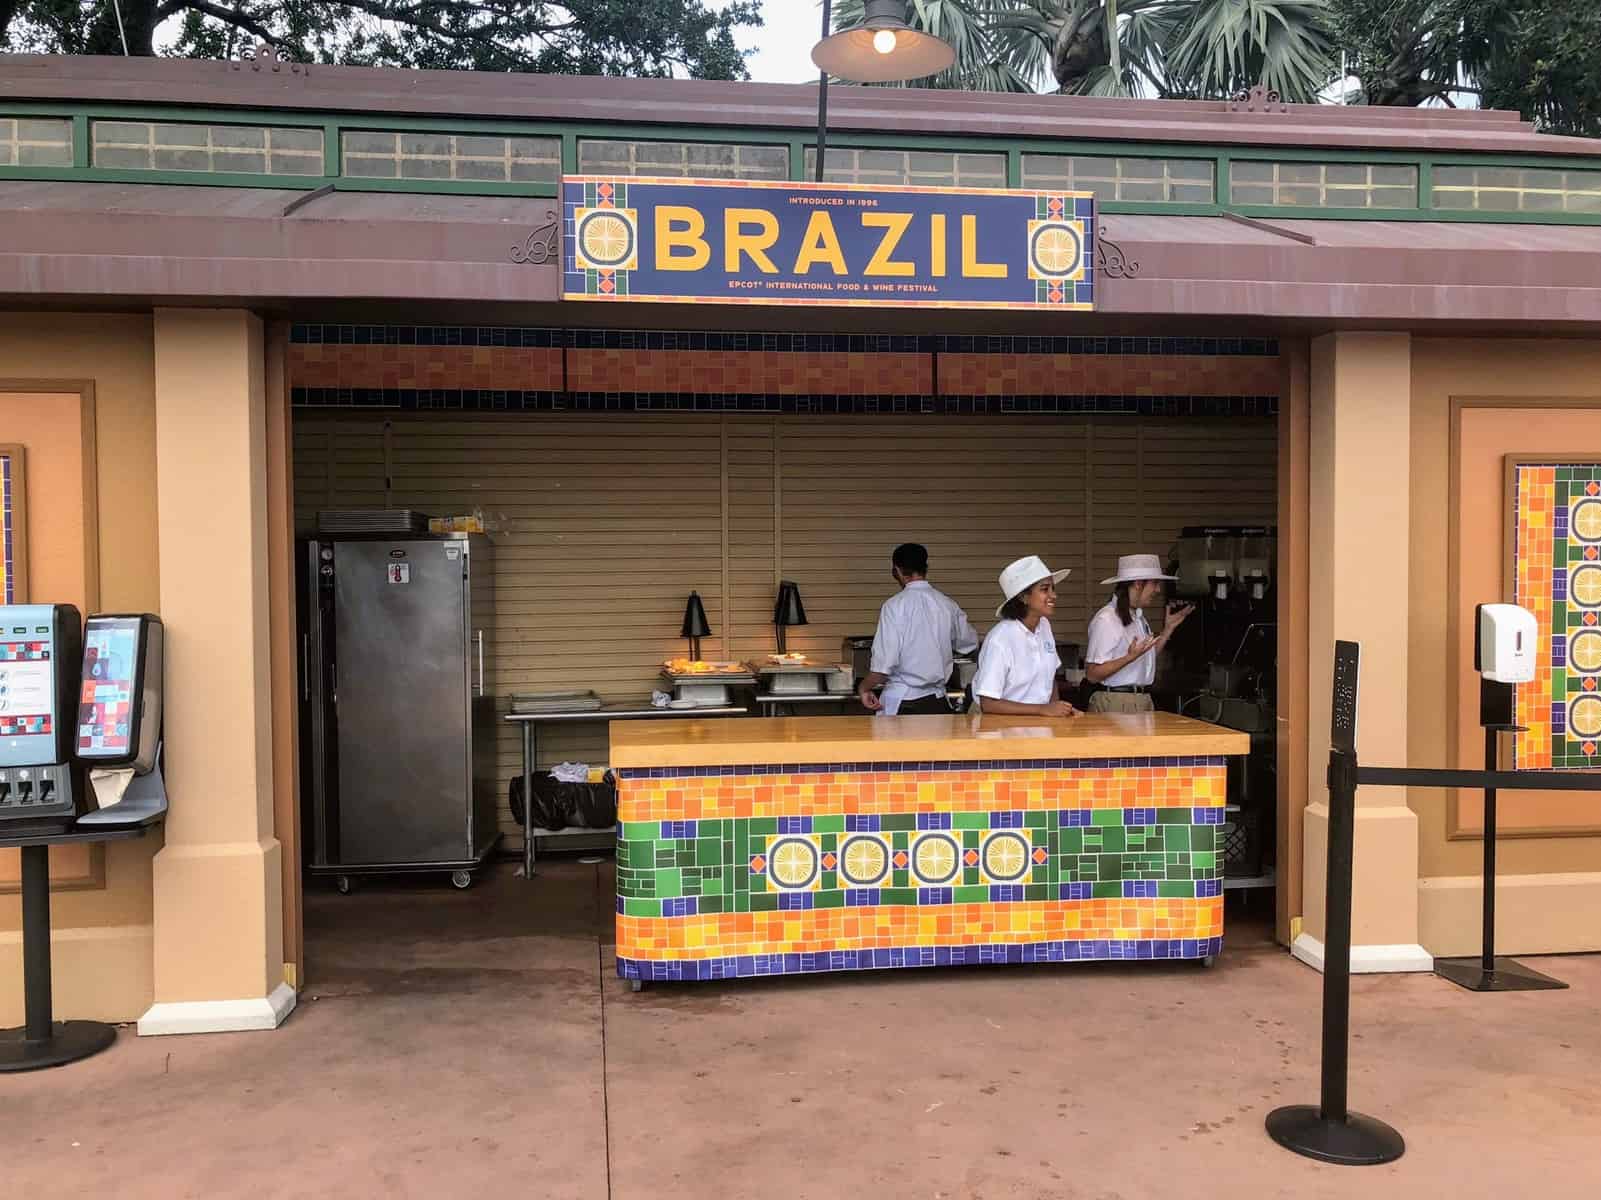 Brazil Booth Menu & Review (Epcot Food & Wine Festival)